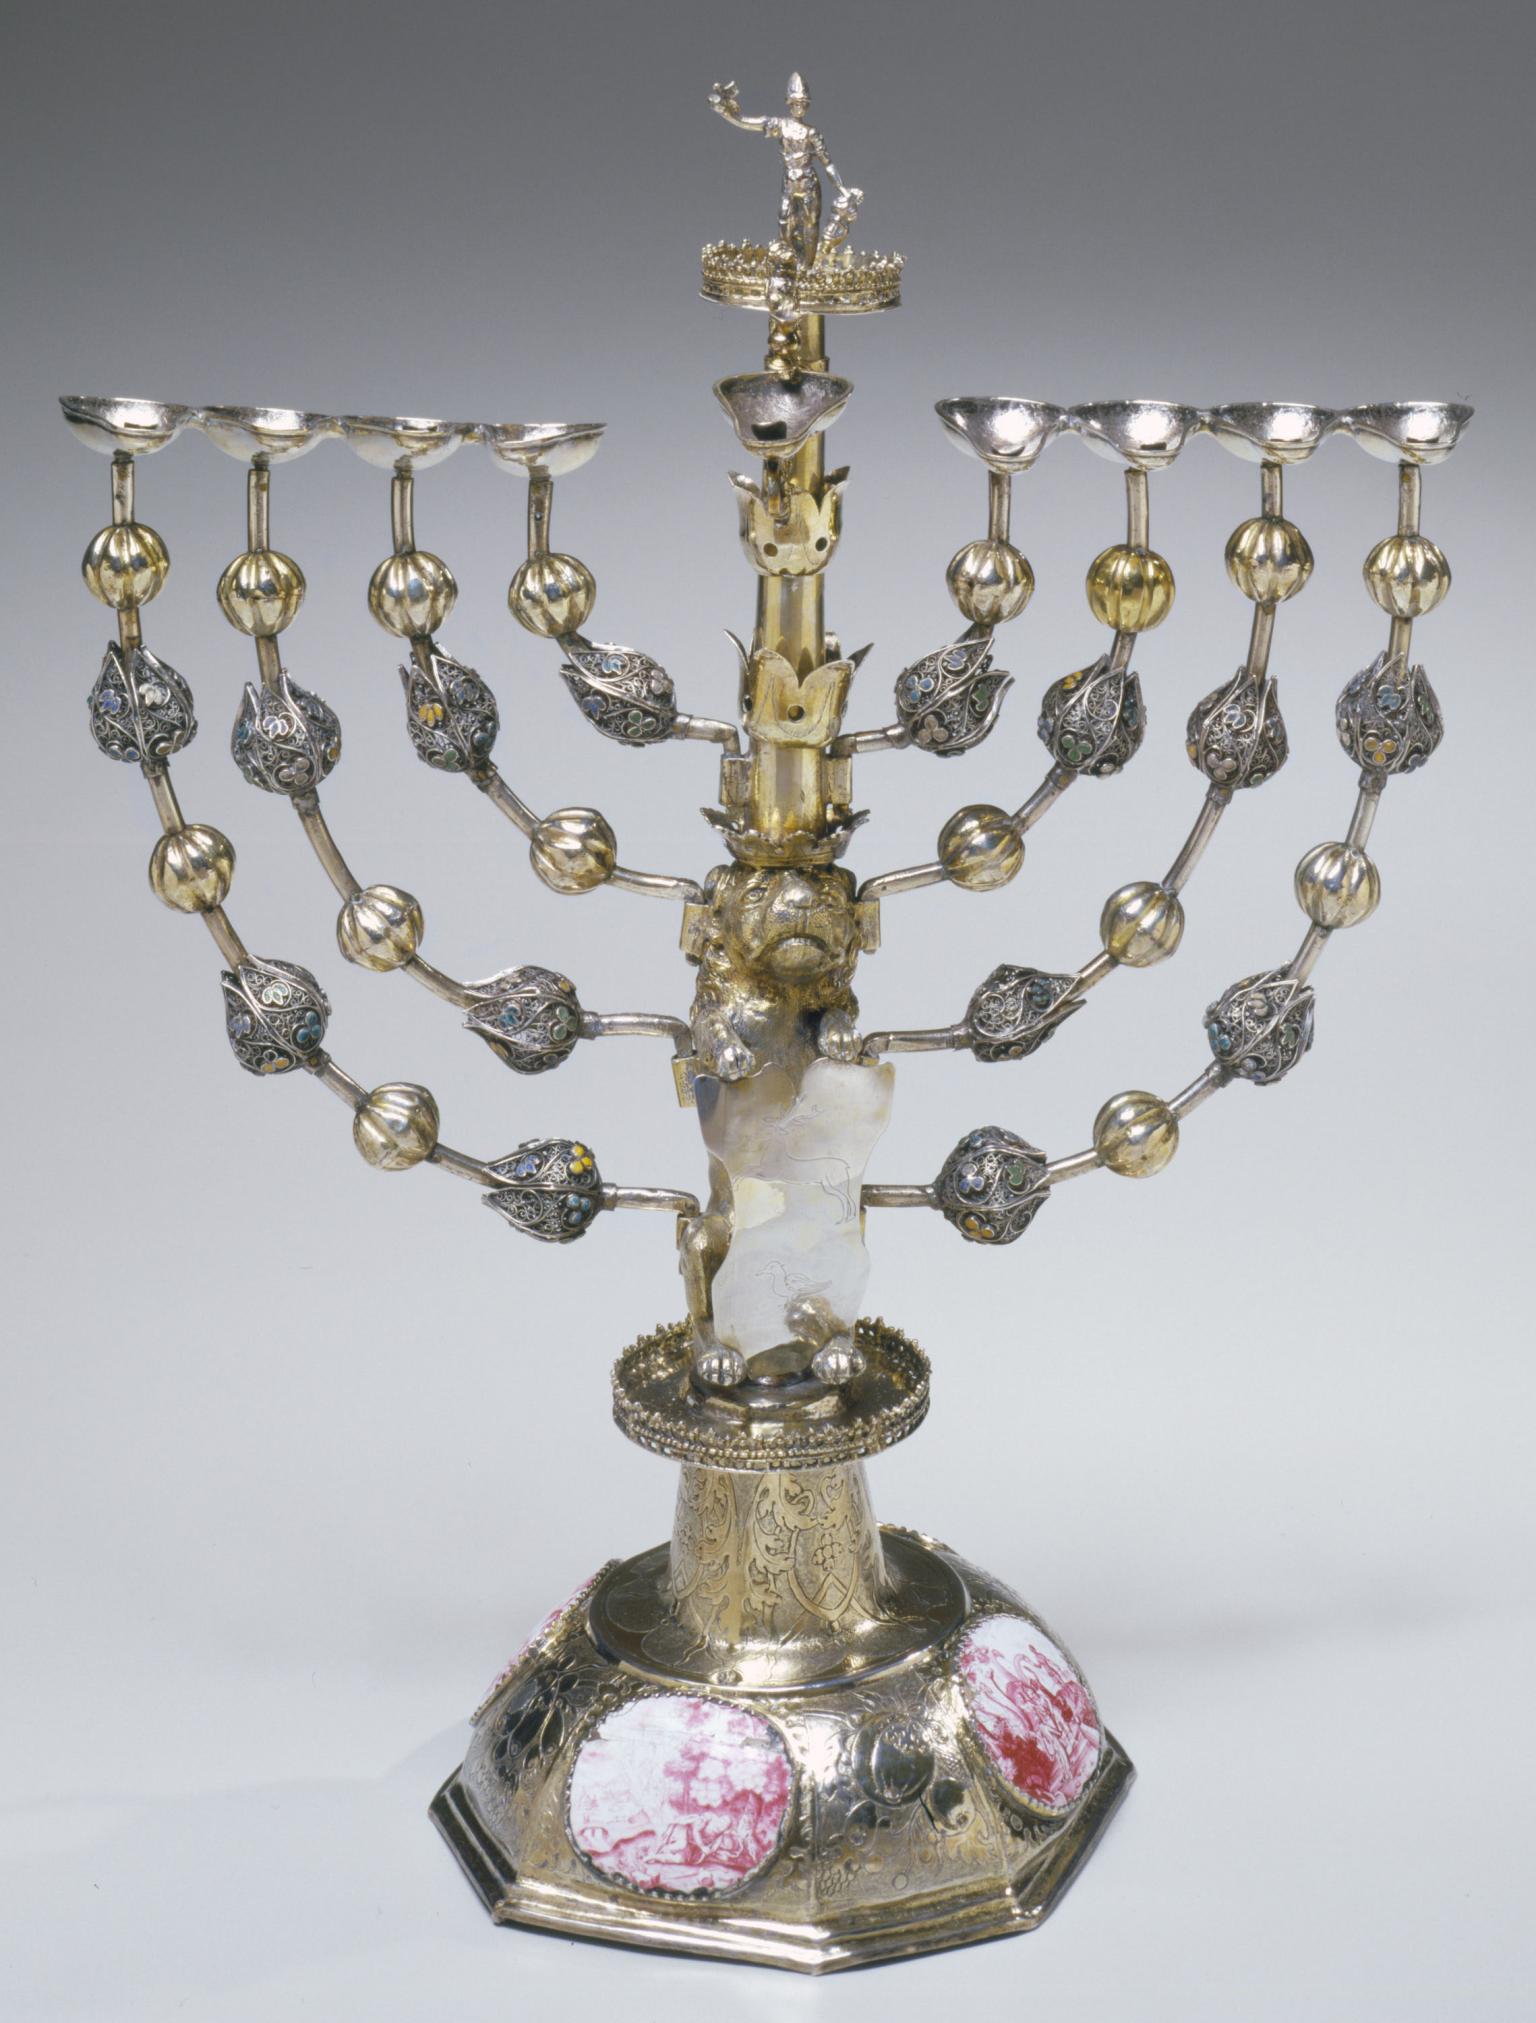 Silver candelabrum with eight branches and a central branch with carved figure on top, and decorative beads on each branch. 